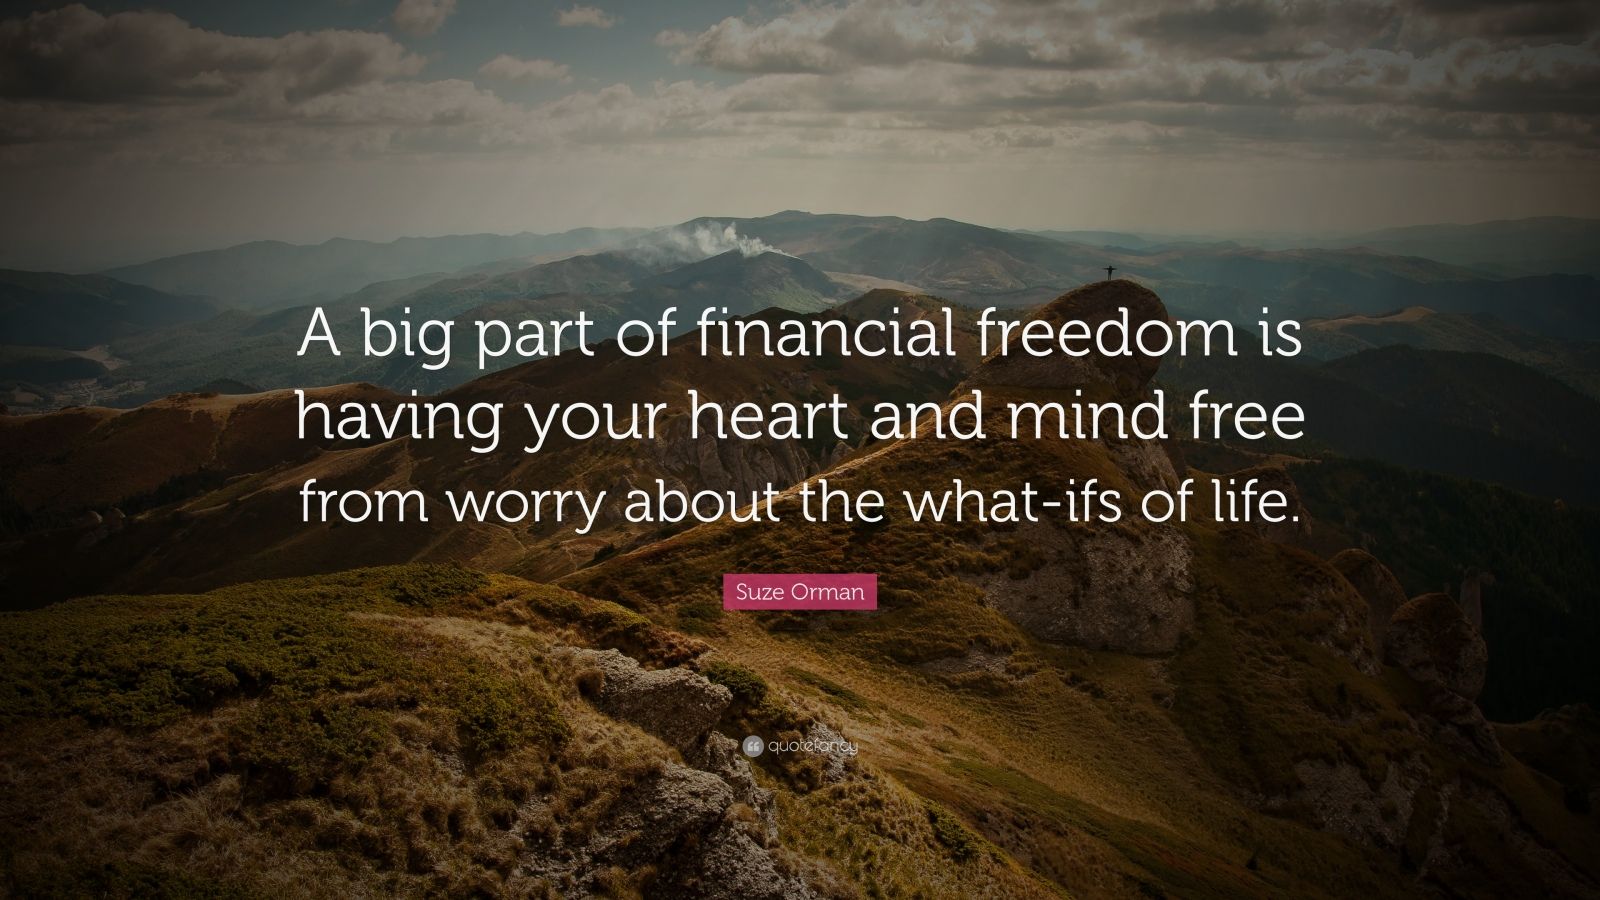 Suze Orman Quote: “A big part of financial freedom is having your heart